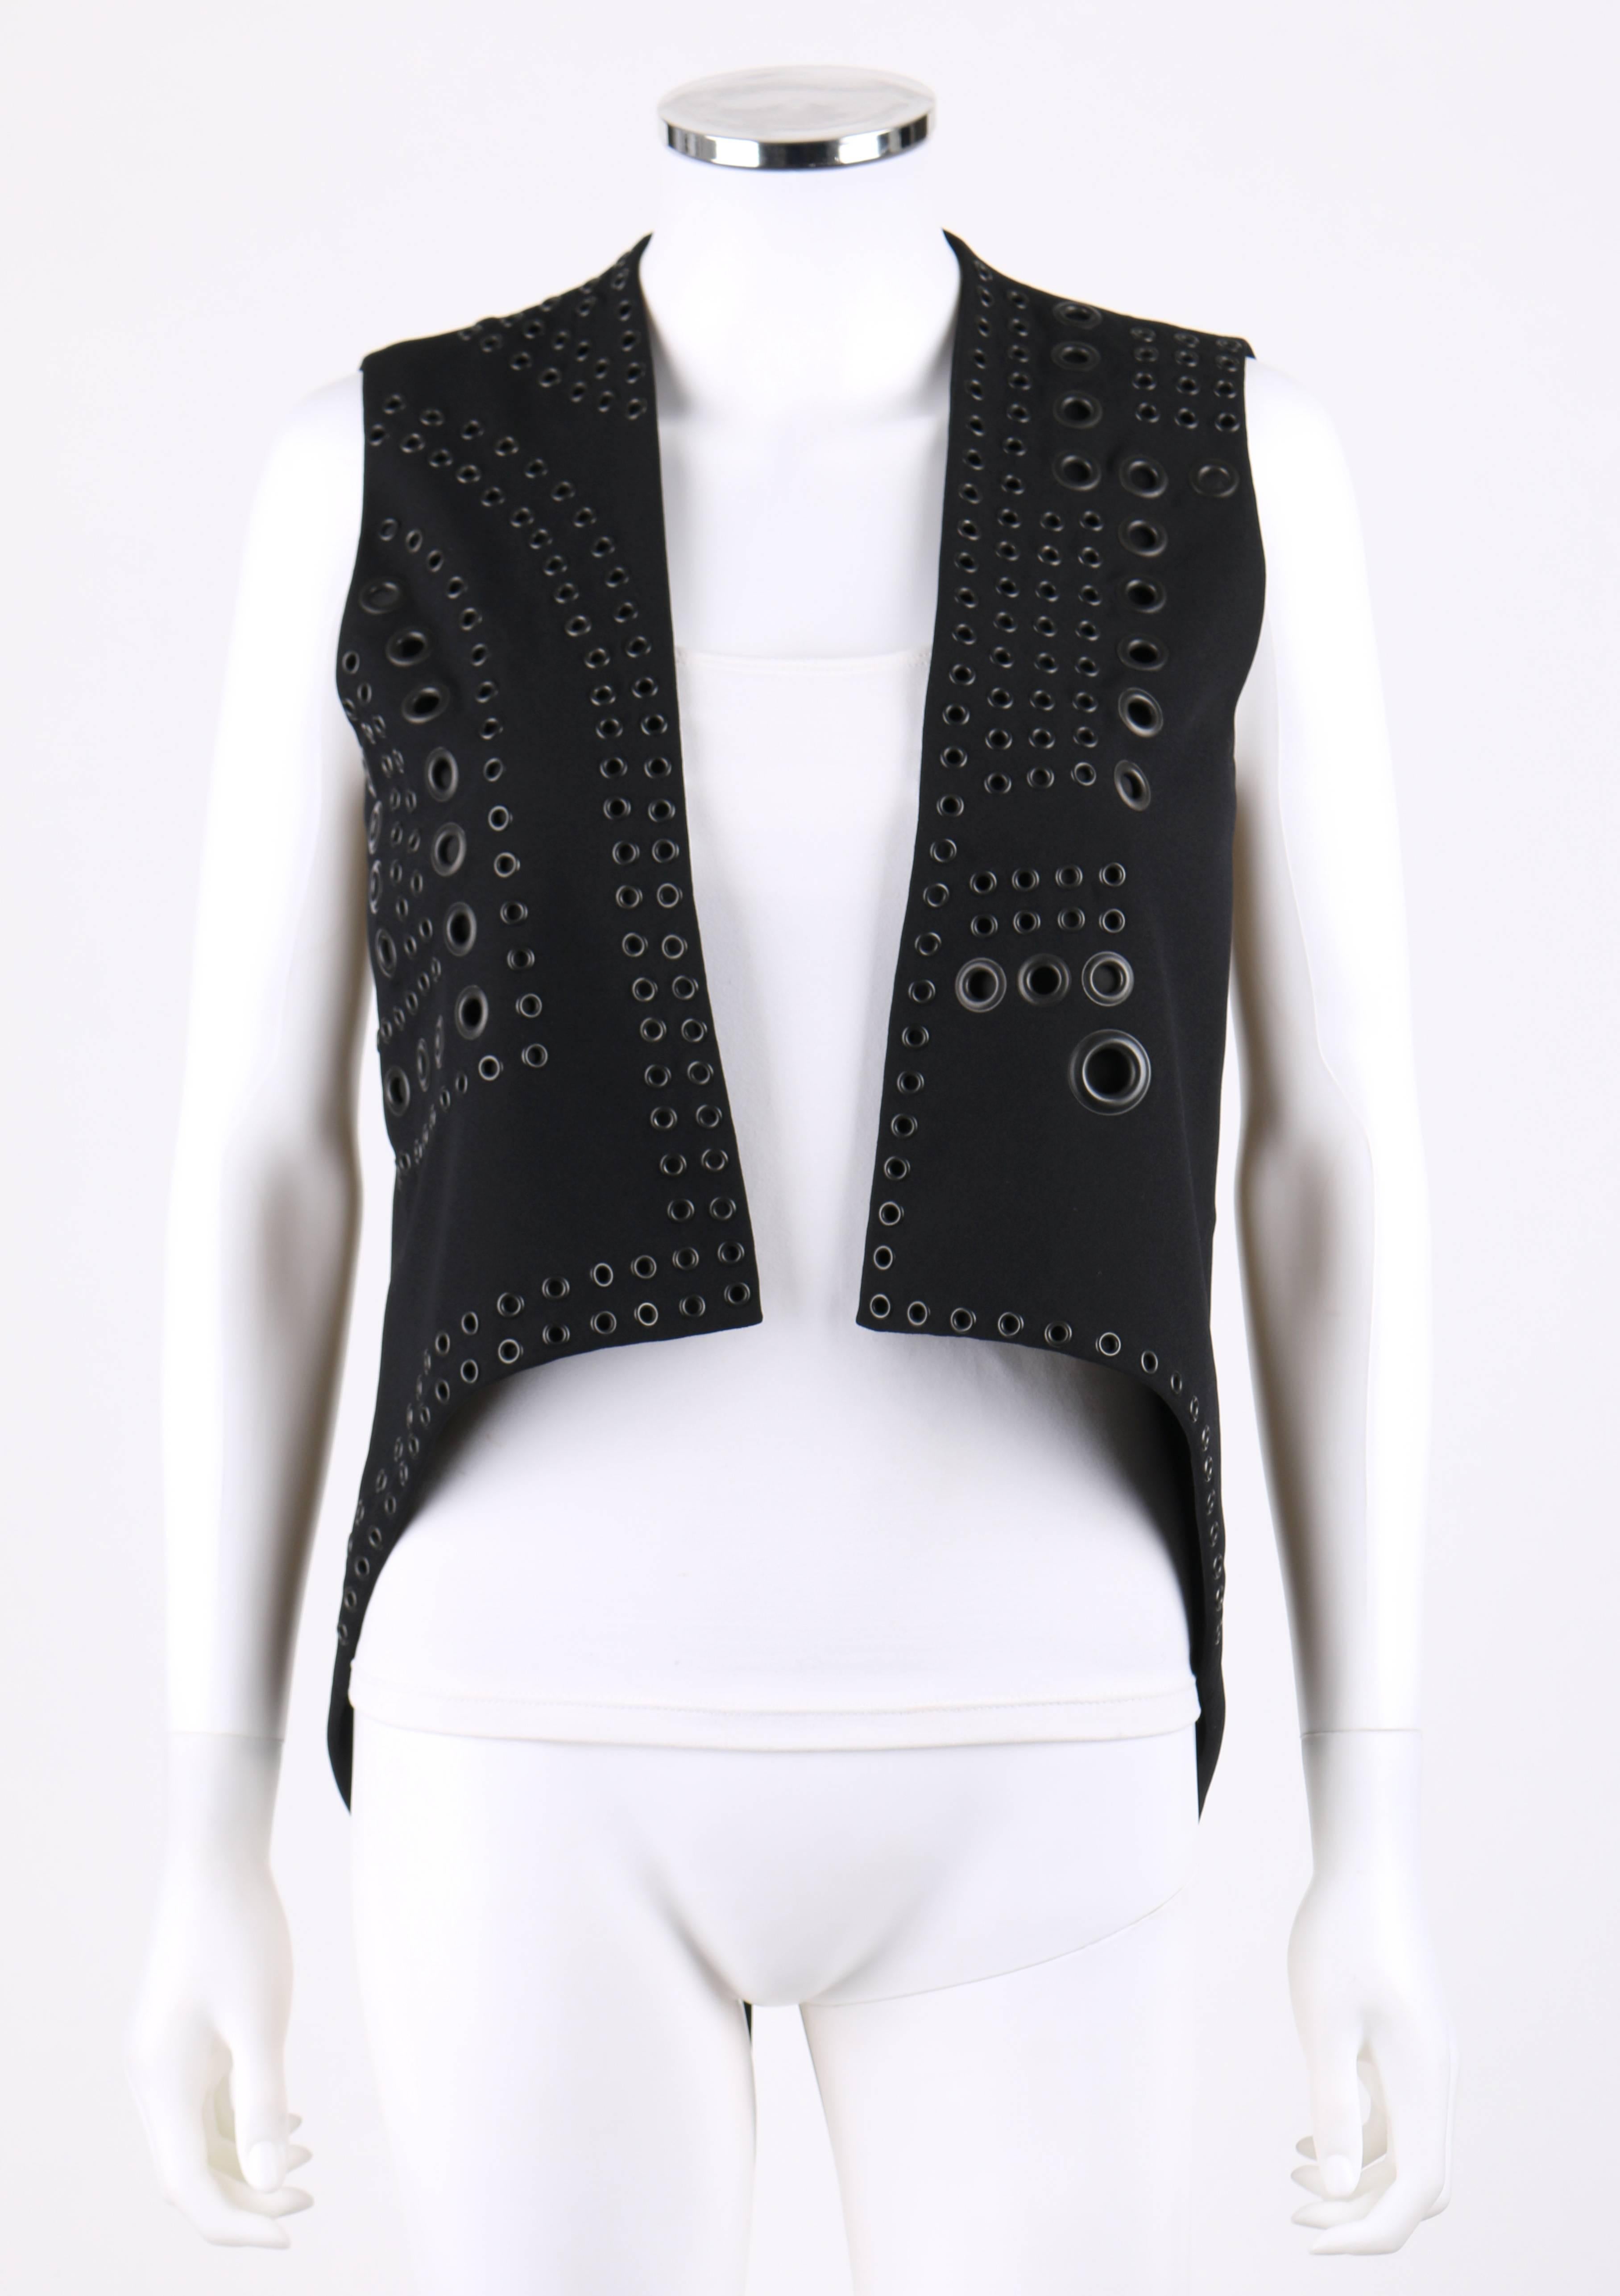 Givenchy c.2011 black vest embellished with various sized gunmetal toned grommets. Elongated coattails with 12